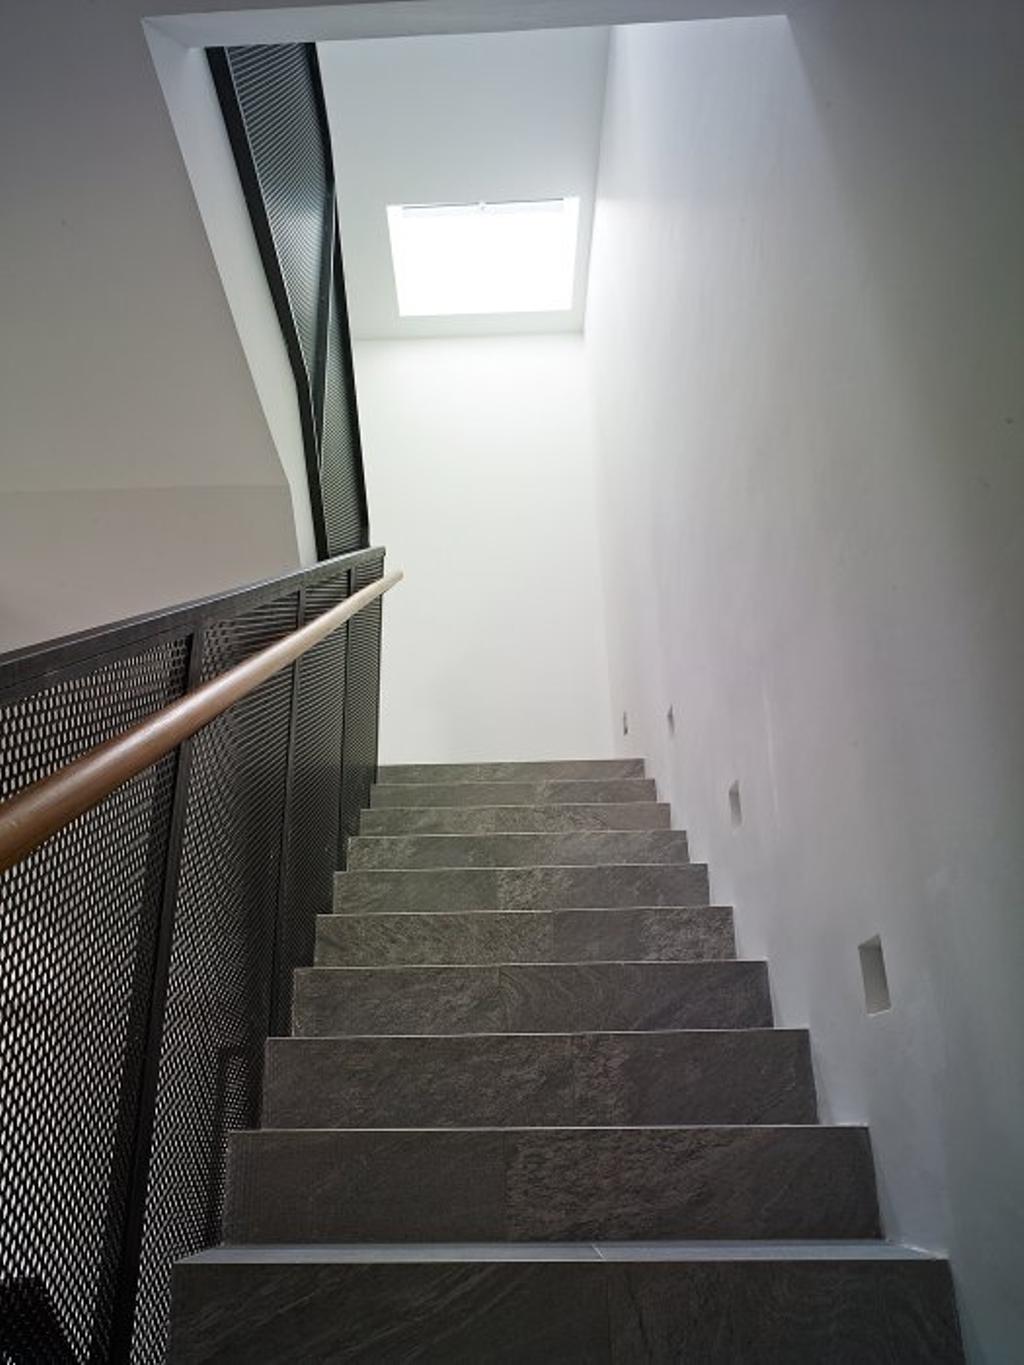 Minimalist, Landed, House at JM, Architect, OWMF Architecture, Railing, Banister, Handrail, Staircase